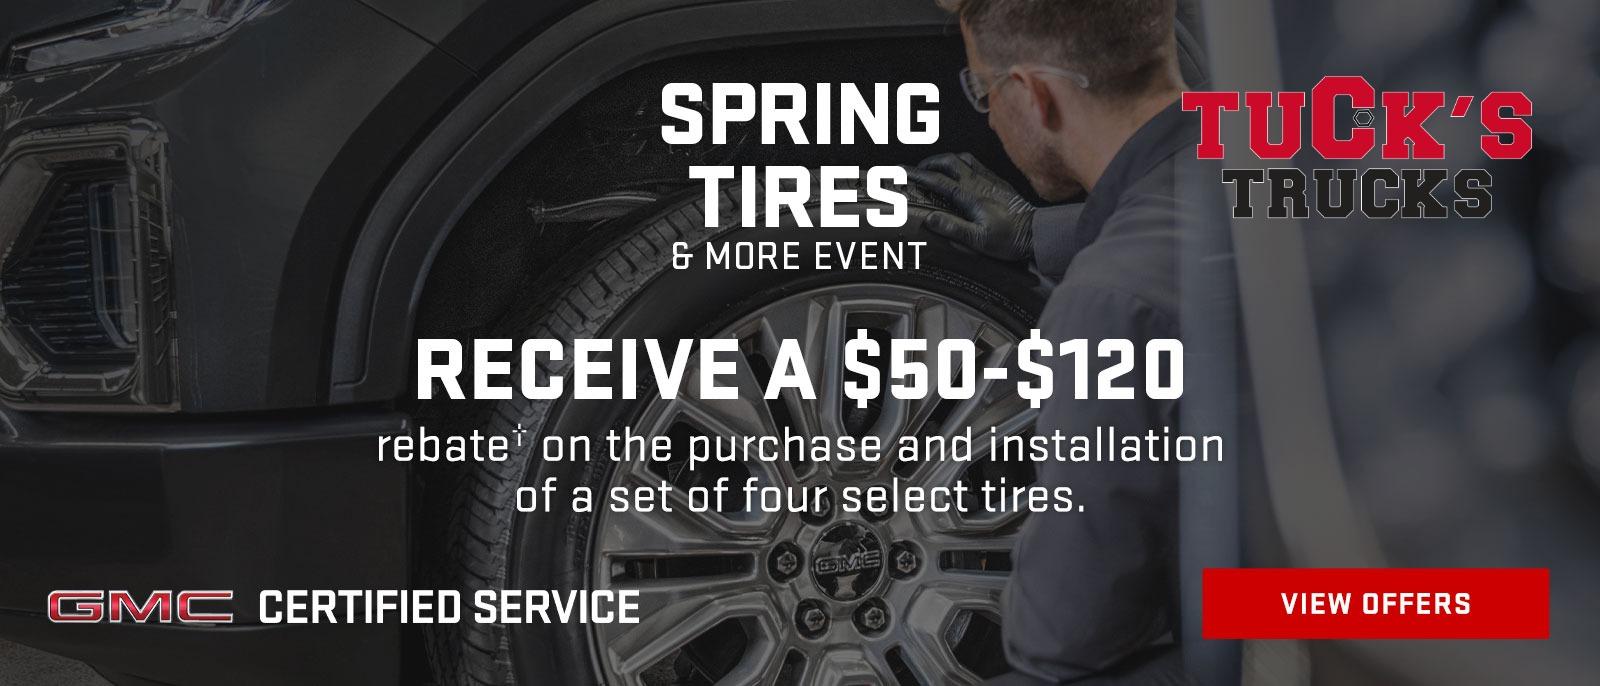 Spring Tires and More Event